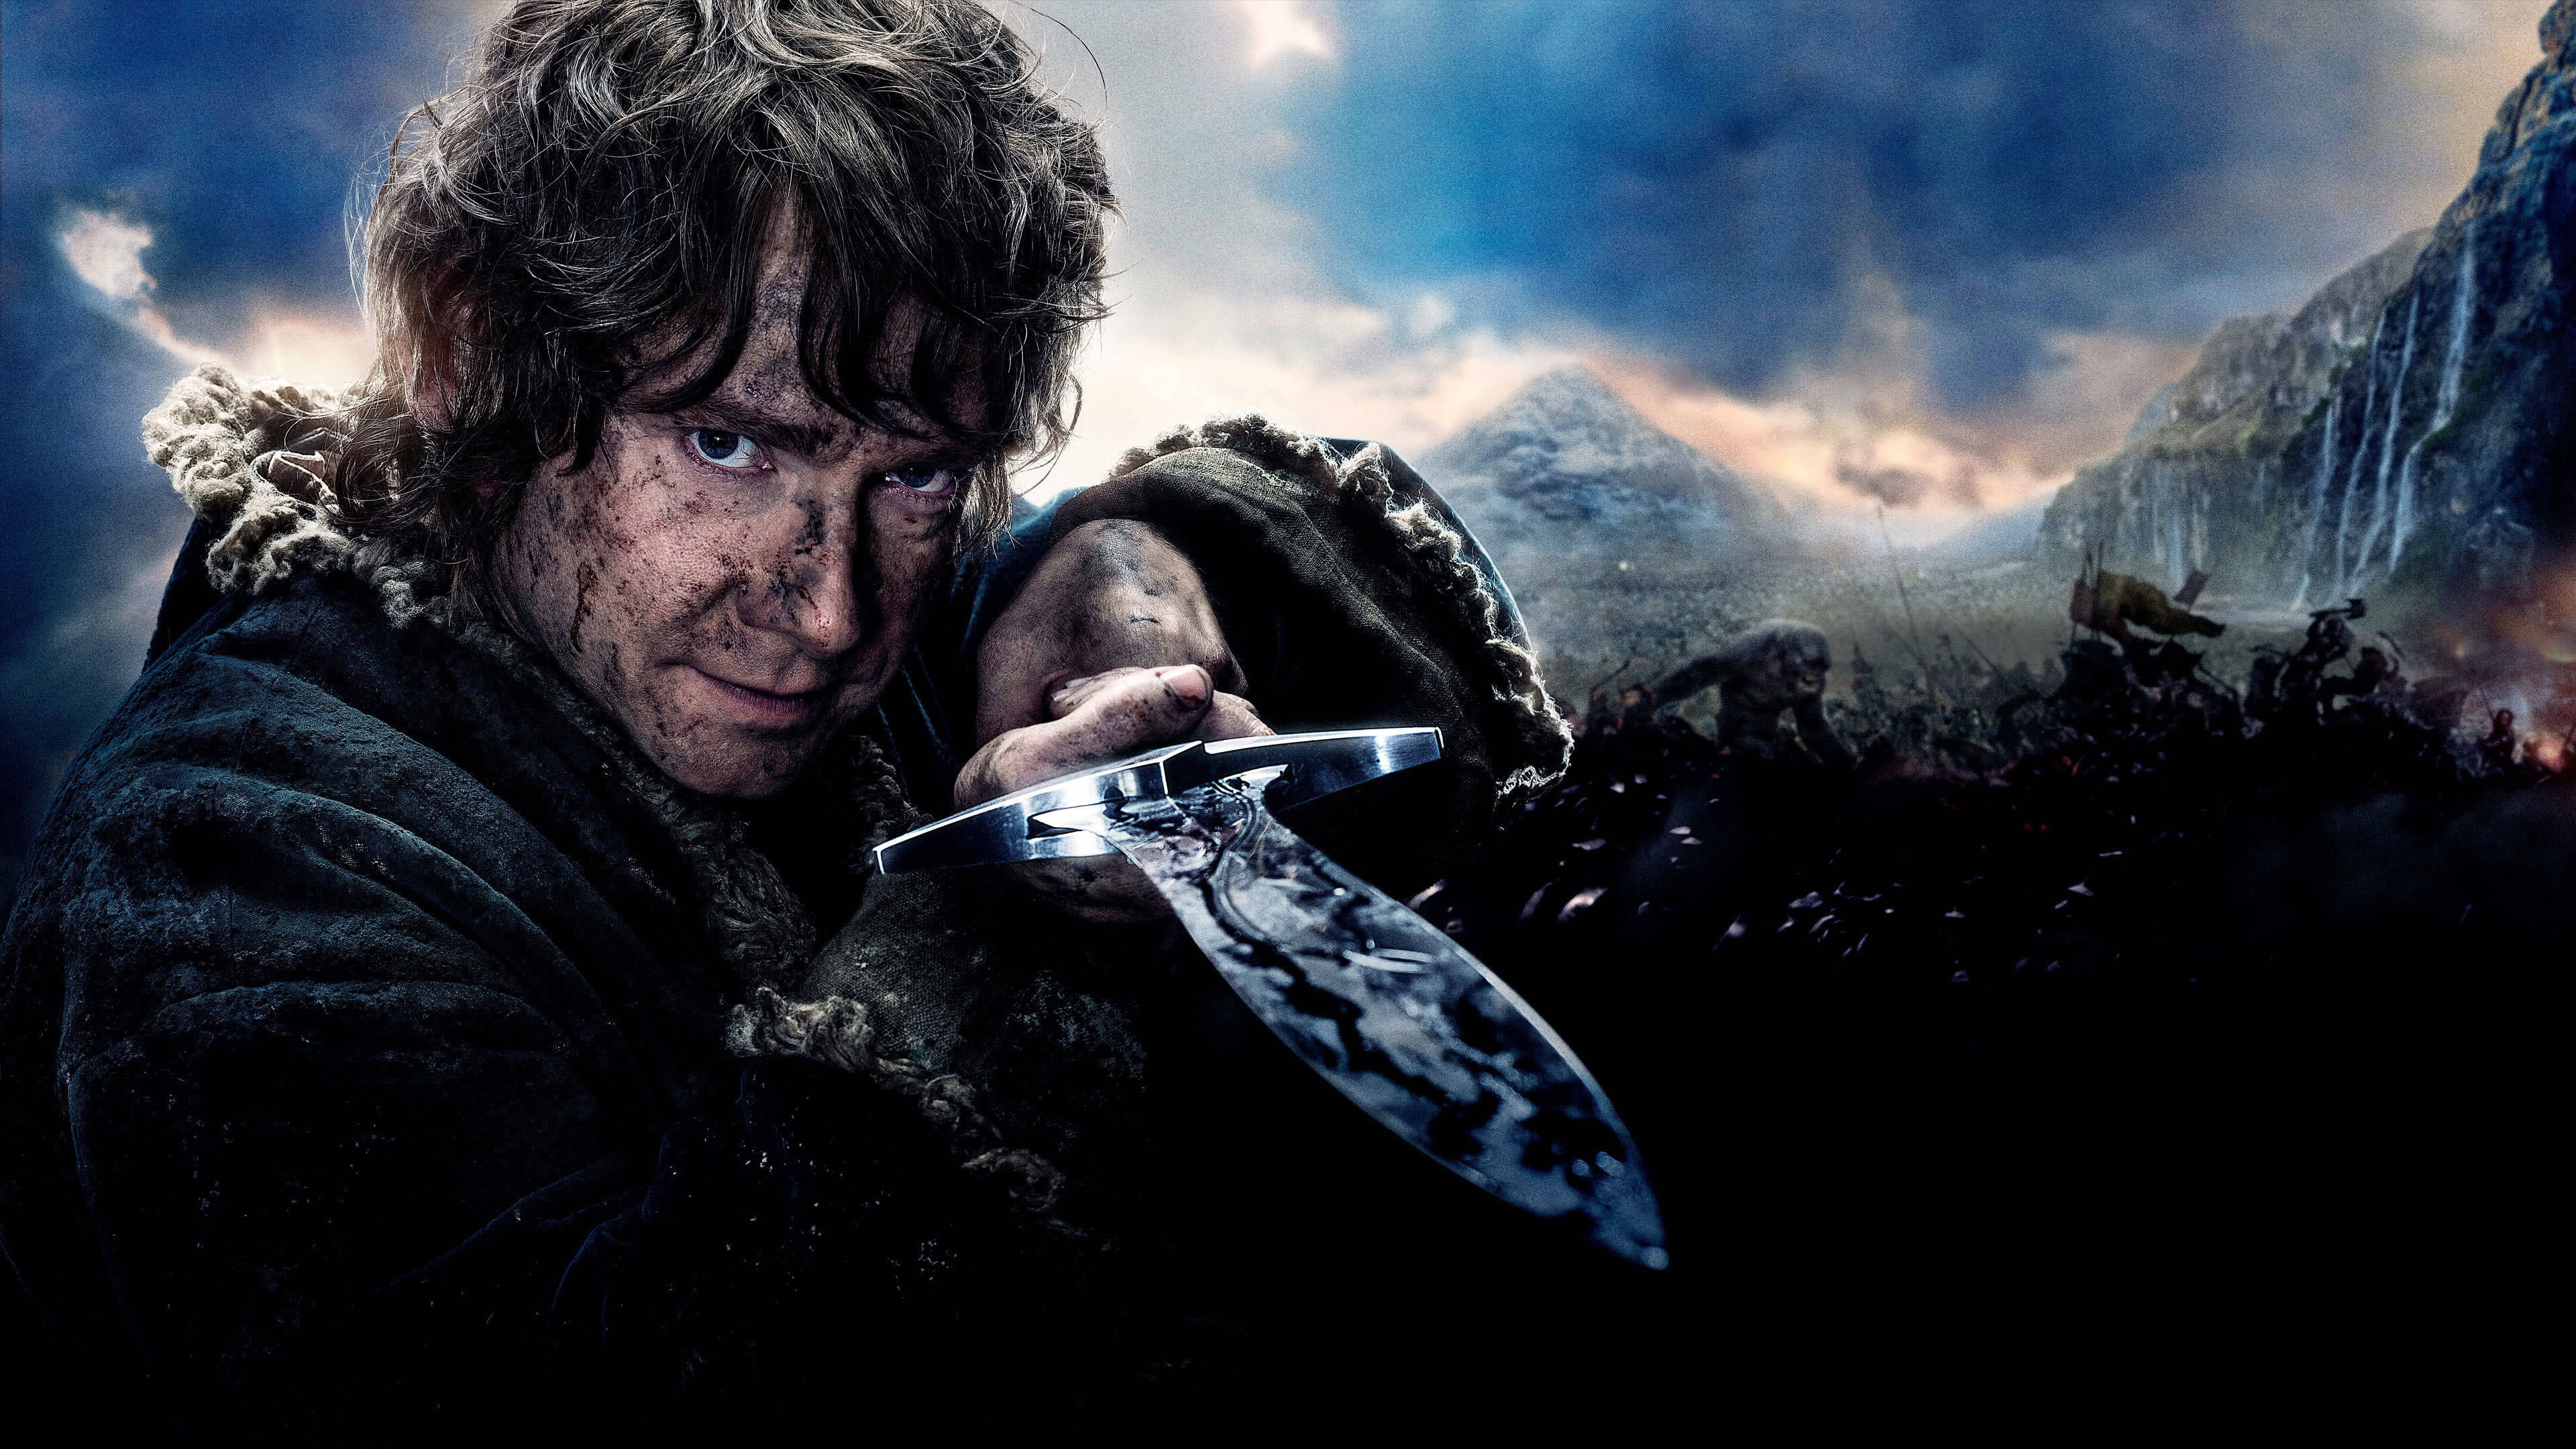 The Hobbit (Movie): Bilbo Baggins, The title character and protagonist of J. R. R. Tolkien's 1937 novel, Sting sword. 3840x2160 4K Background.